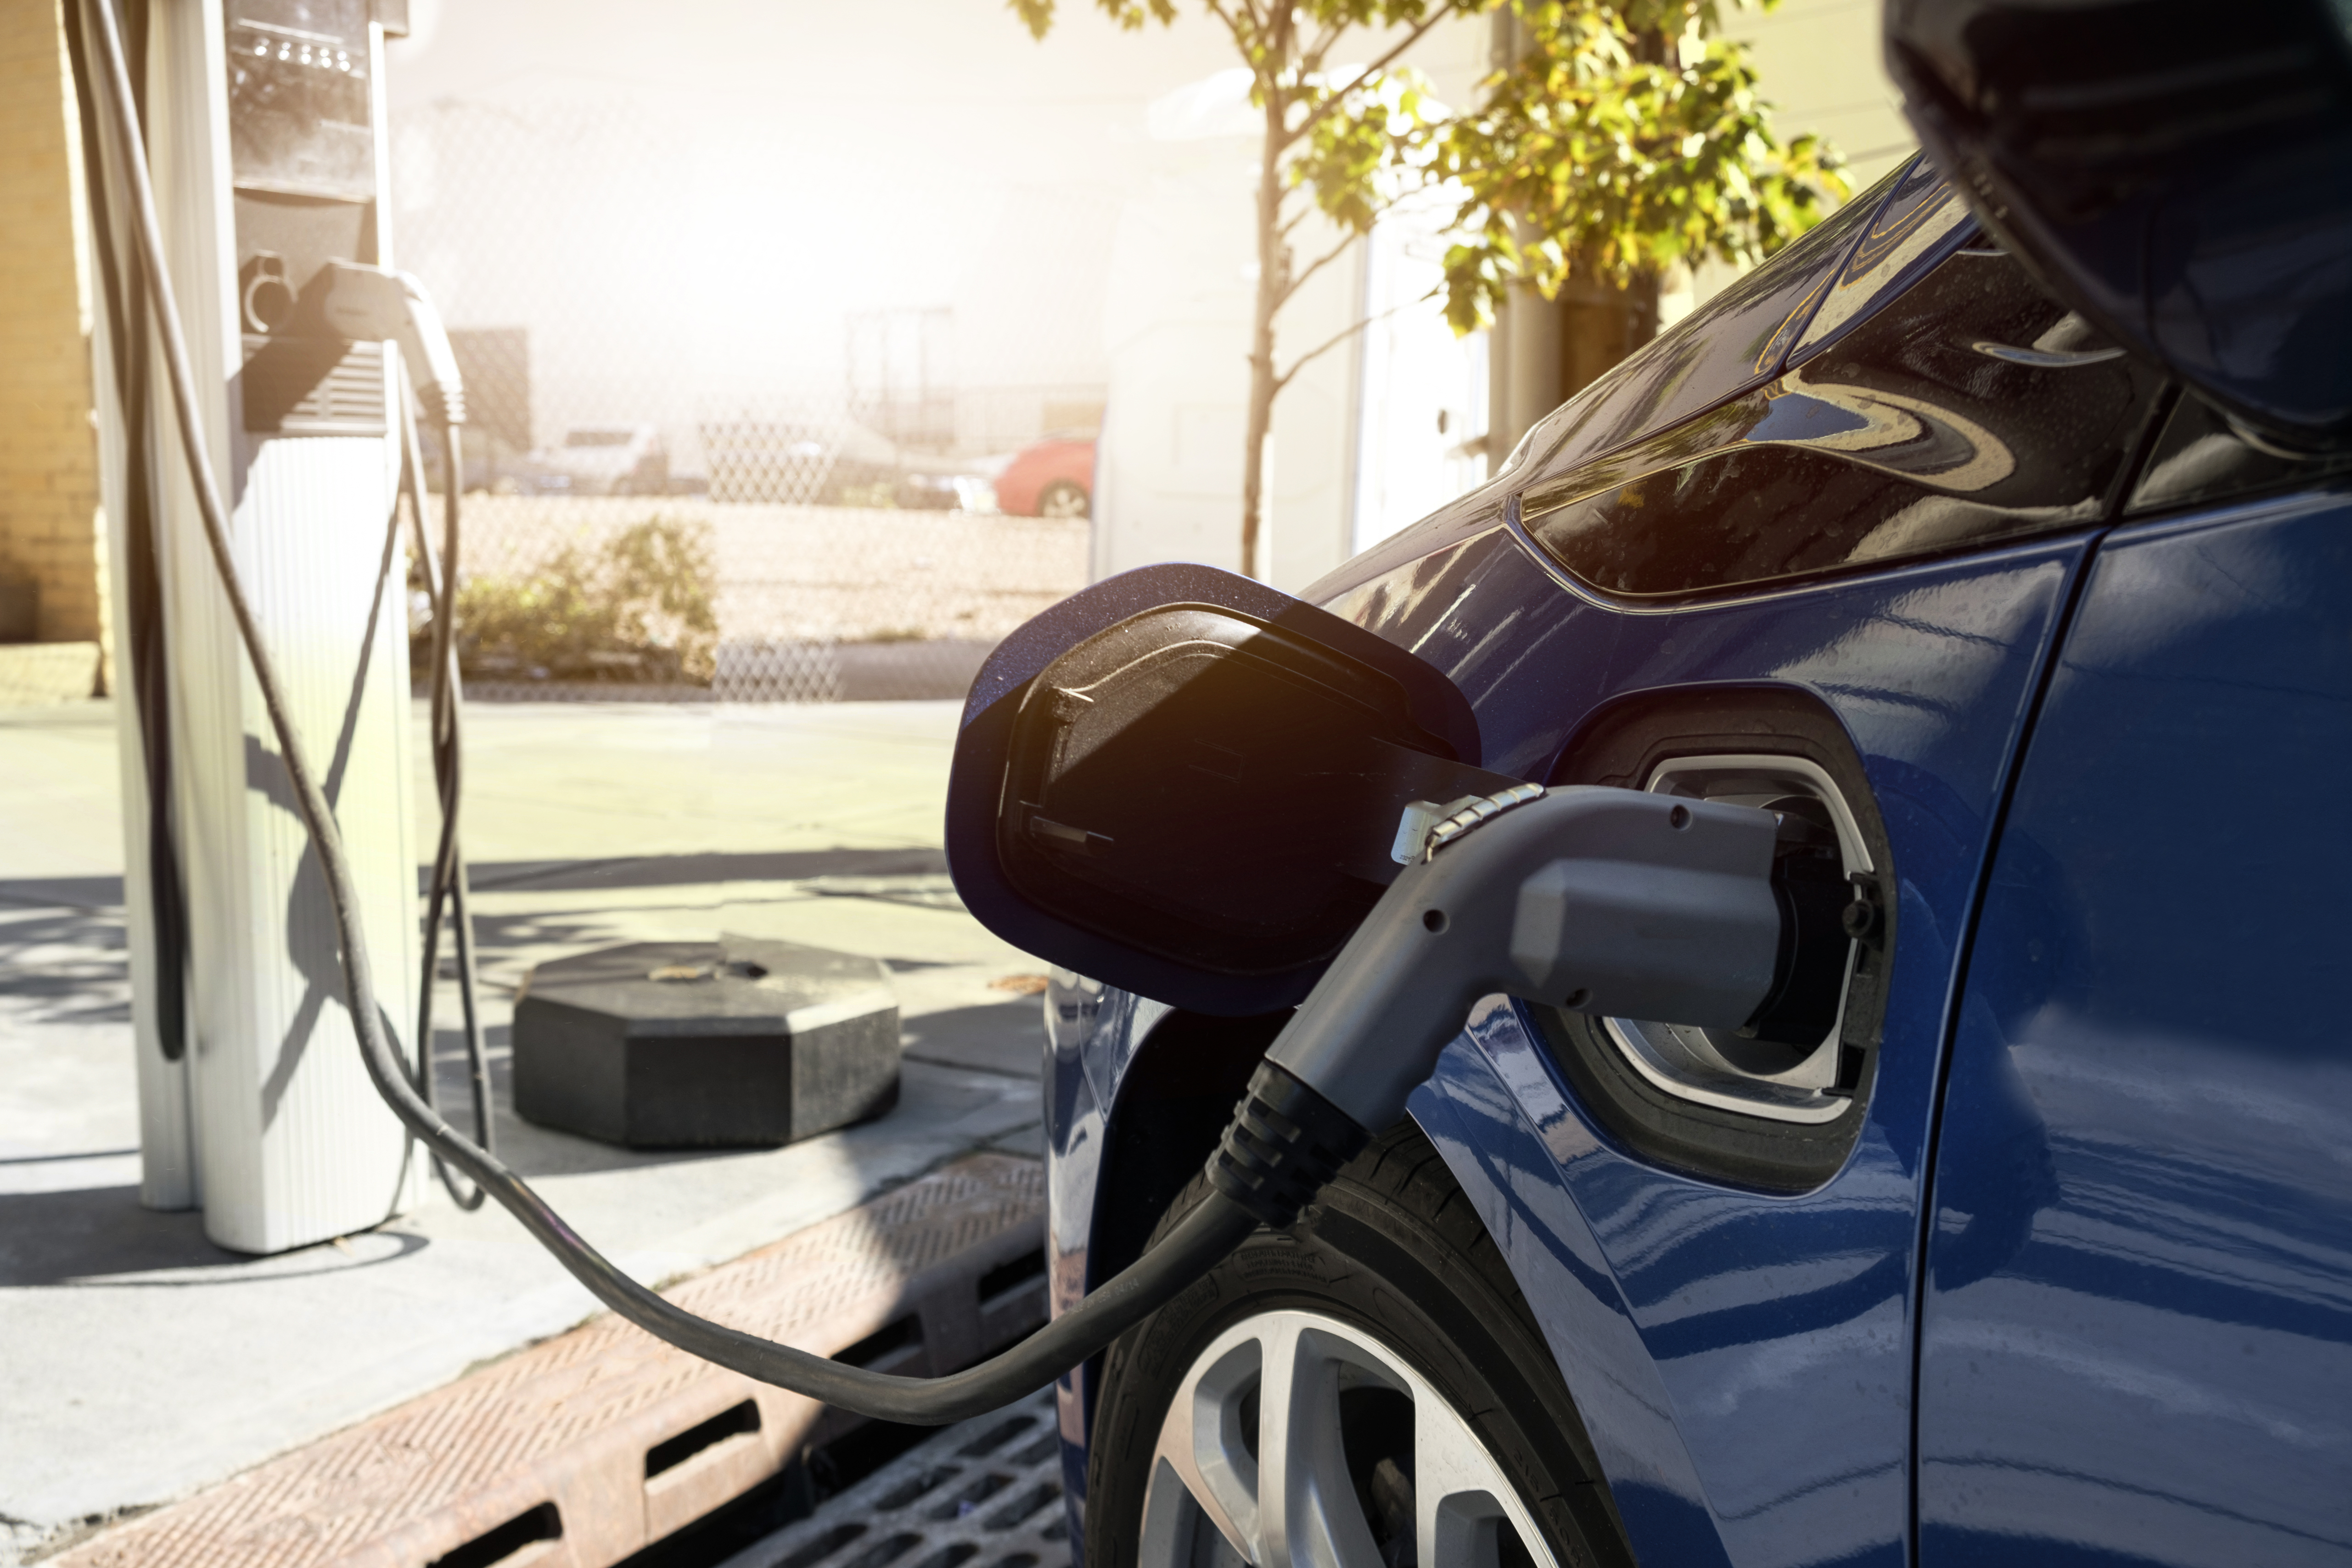 Charging Electric Cars at Home - Can You Charge an EV at Your House?